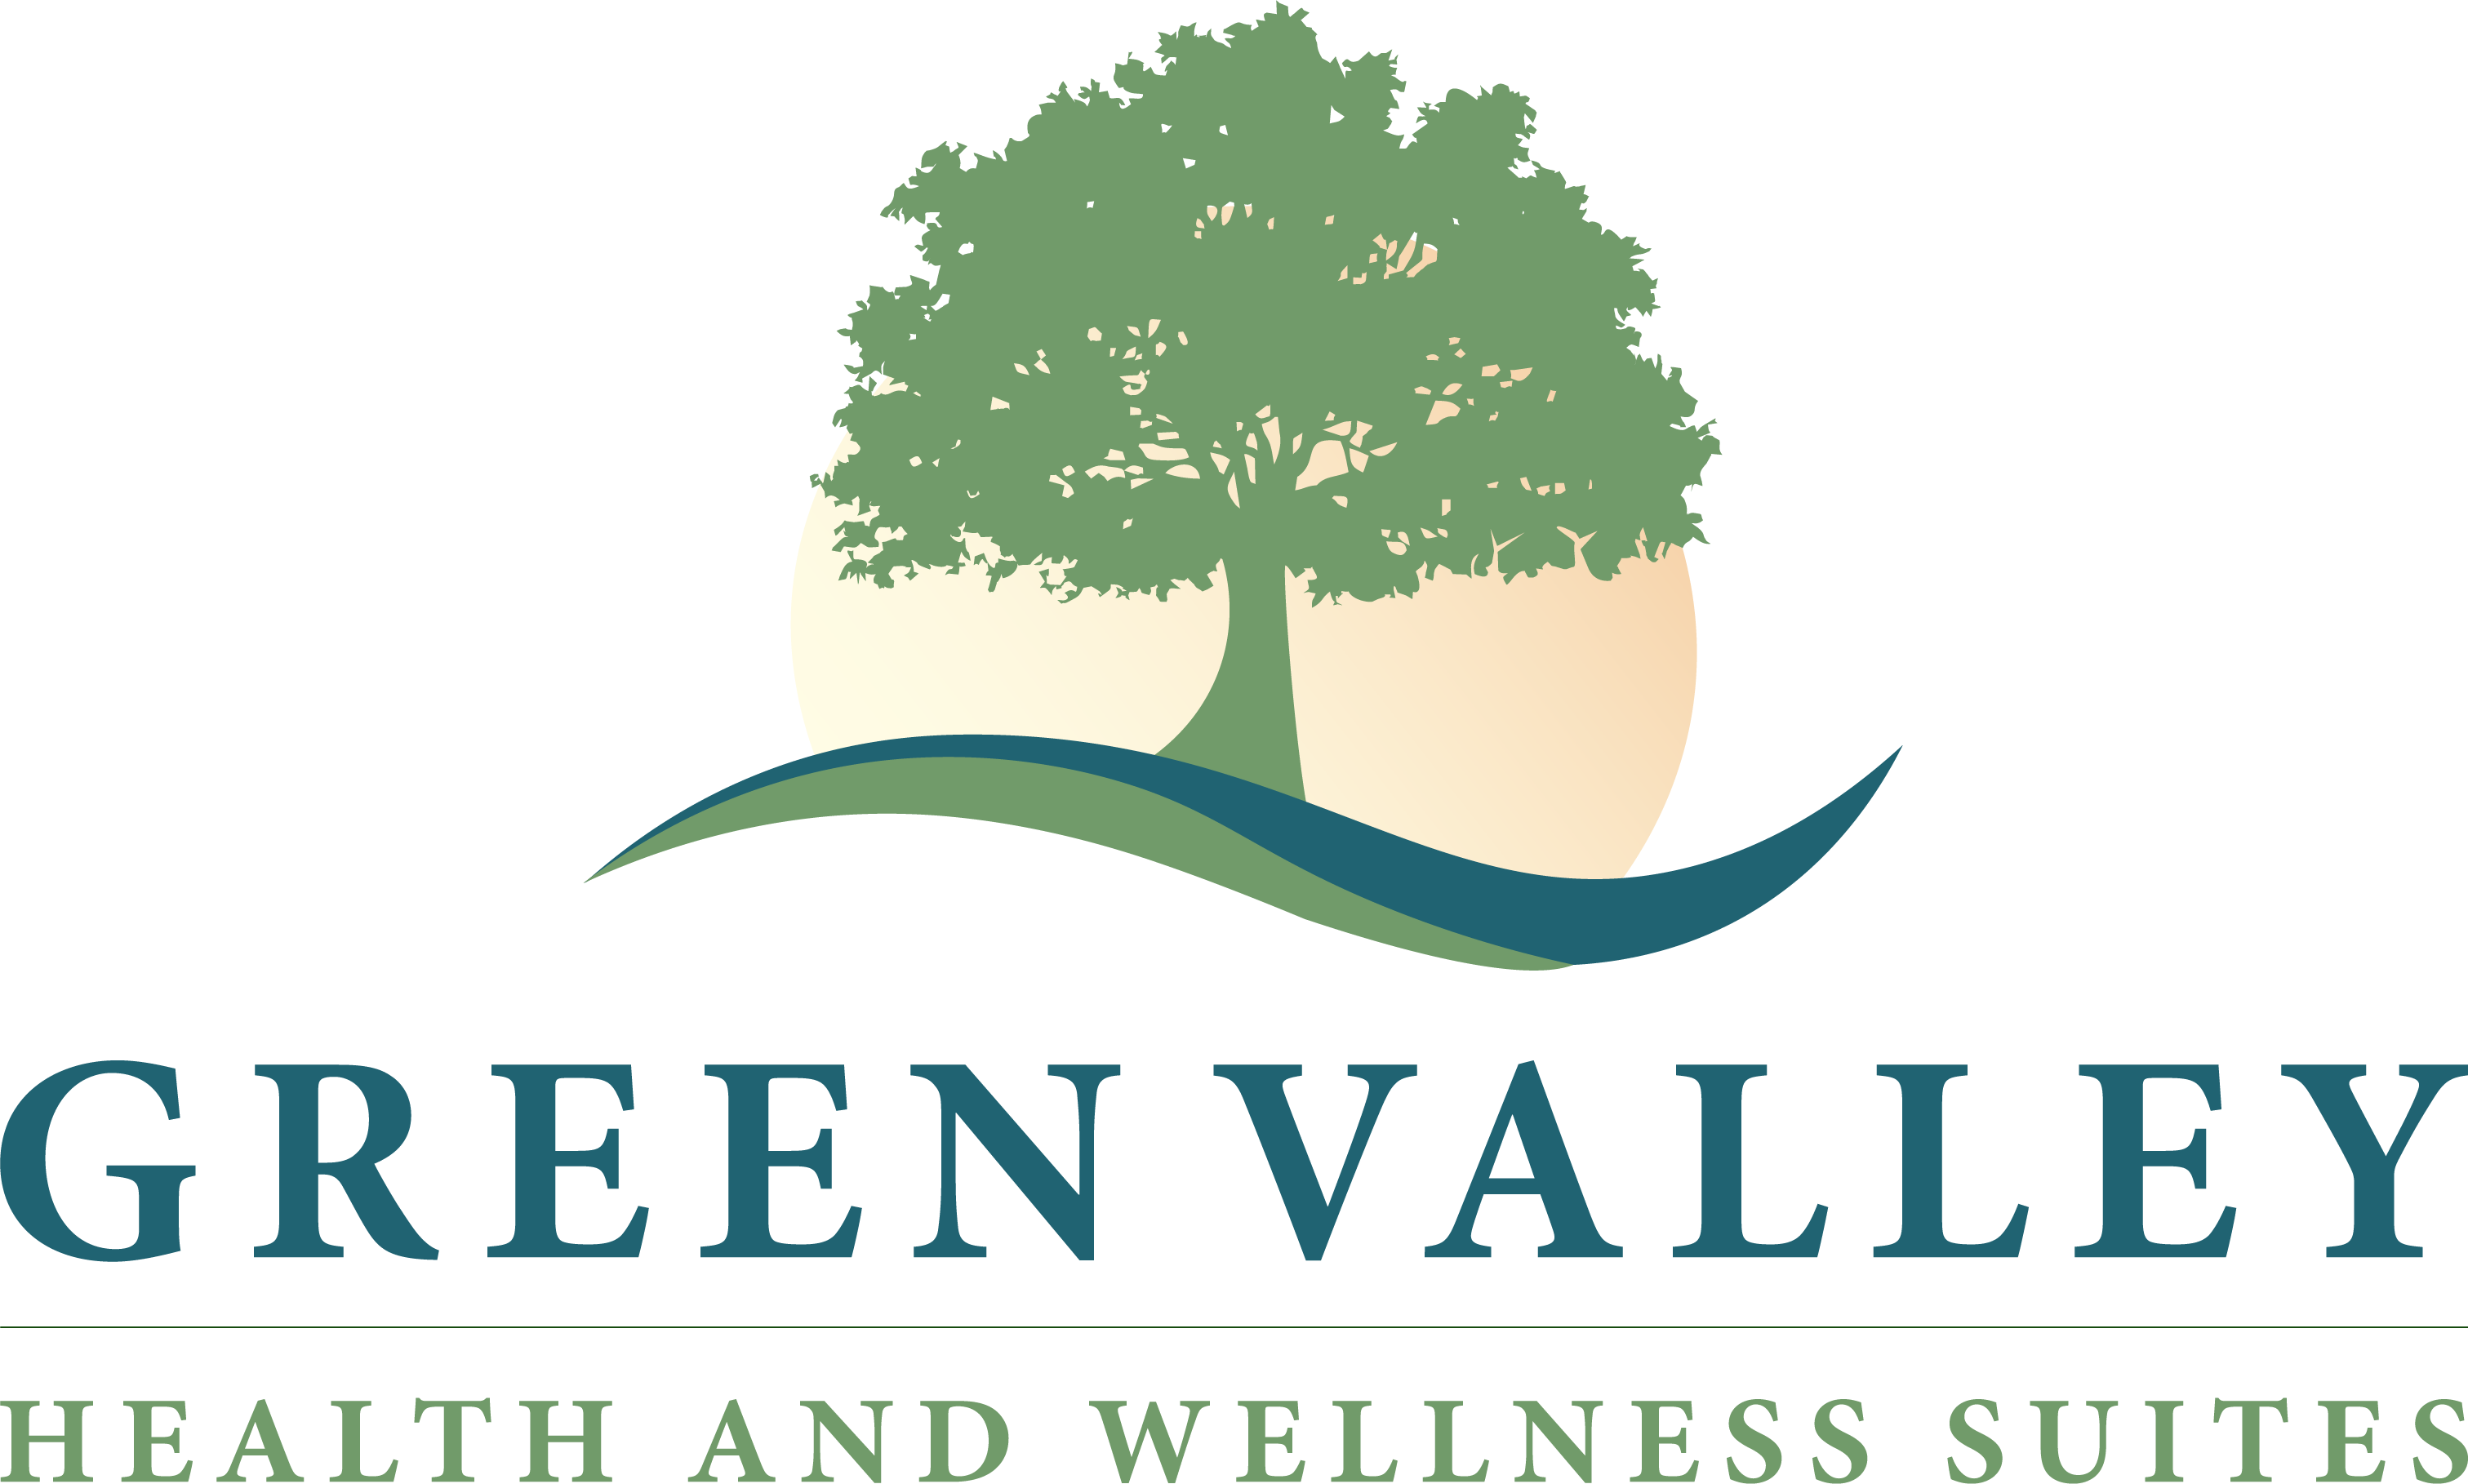 Green Valley Health and Wellness Suites  Green Valley Health and Wellness  Suites is a premier skilled nursing and rehabilitation health facility  located in the Fort Worth Texas community.